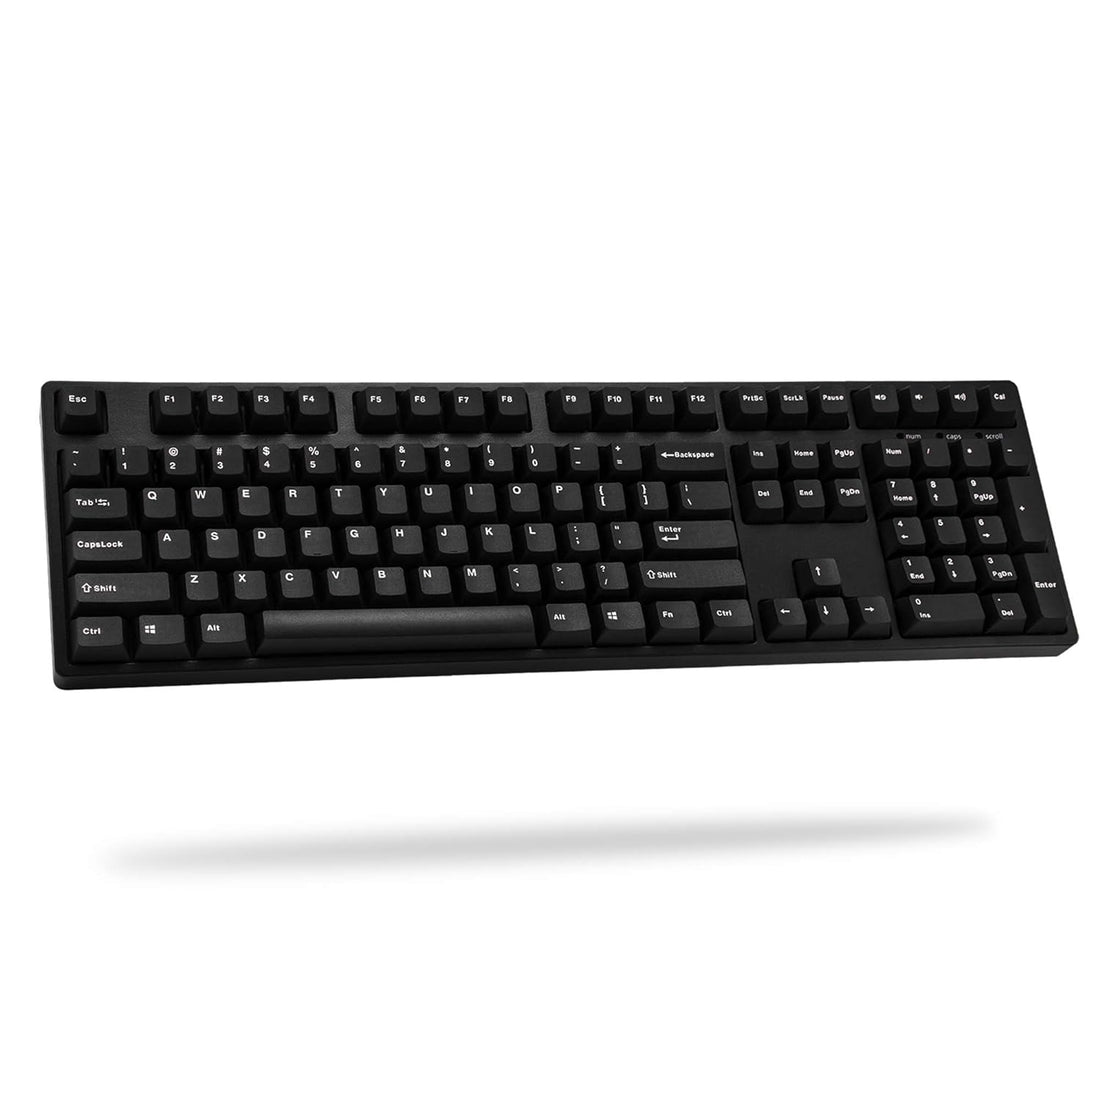 iKBC CD108 v2 Mechanical Keyboard with Cherry MX Brown Switch for Windows and Mac, Full Size Ergonomic Keyboard with PBT Double Shot Keycaps for Desktop and Laptop, 108-Key, Black, ANSI/US